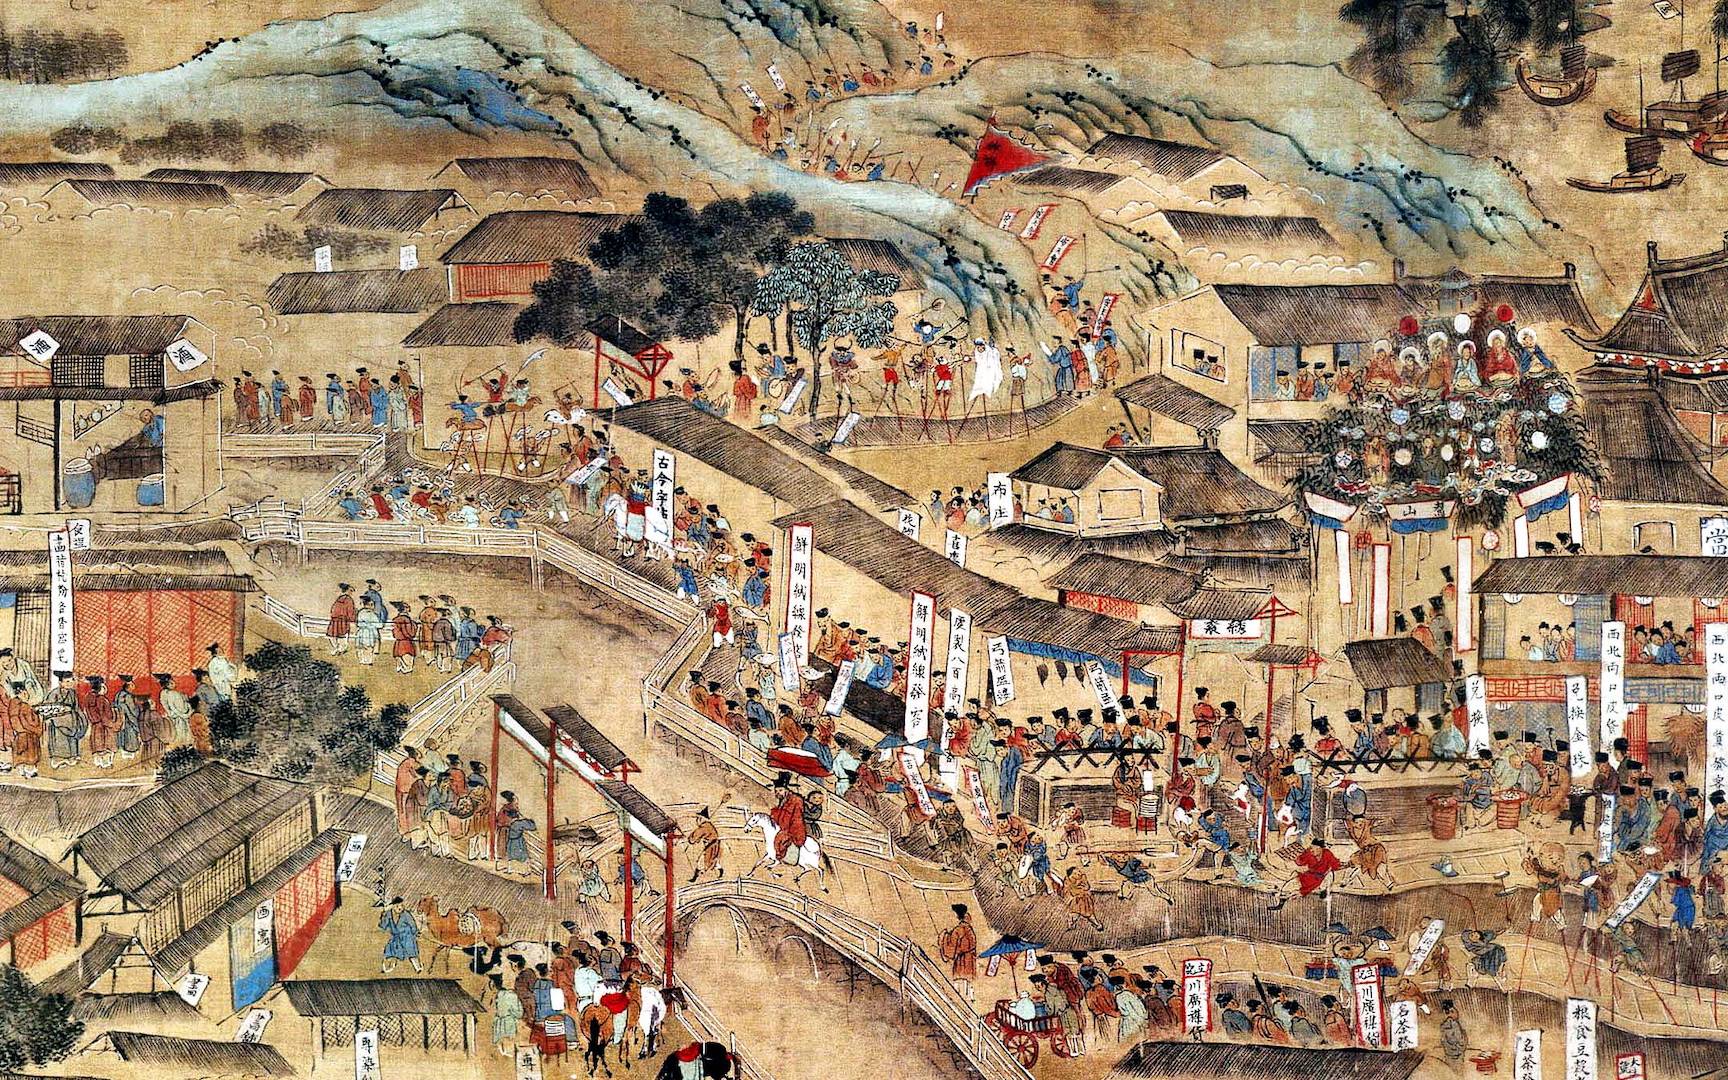 Image: A The bustling and hustling of Nanjing, 1550s. Image © National Museum of China